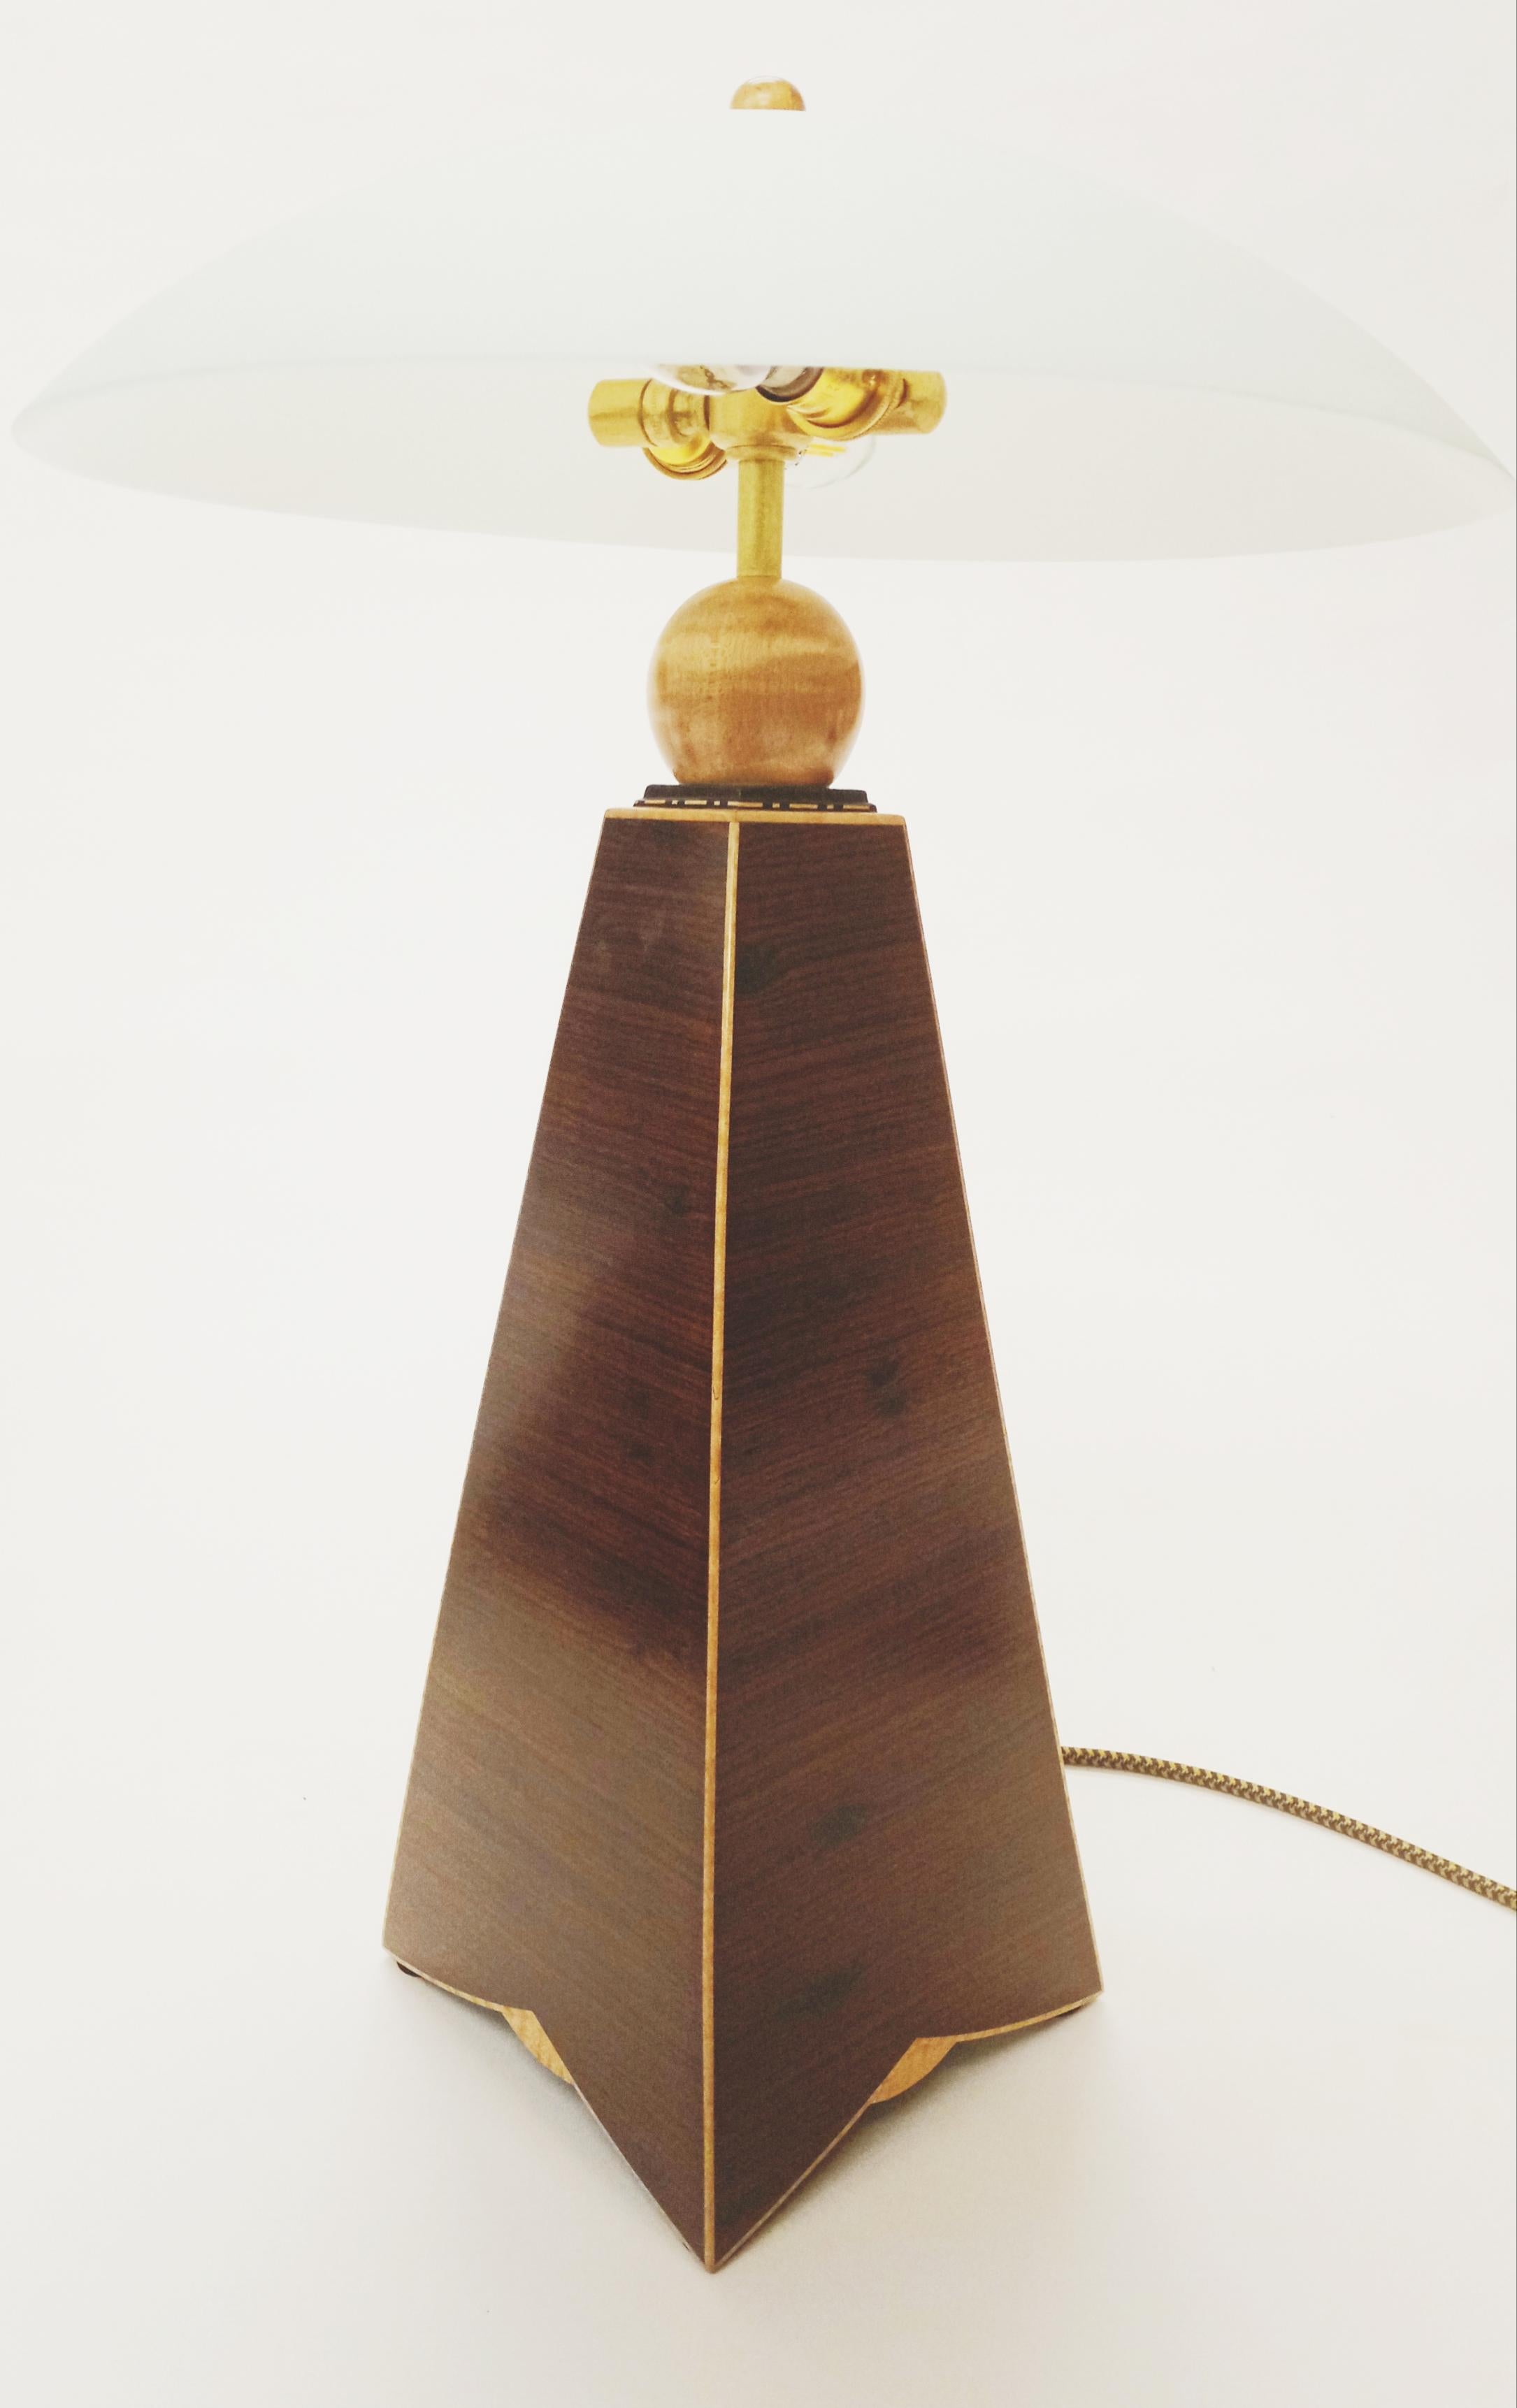 American Table lamp ziricote variation jazz inspired in stock For Sale